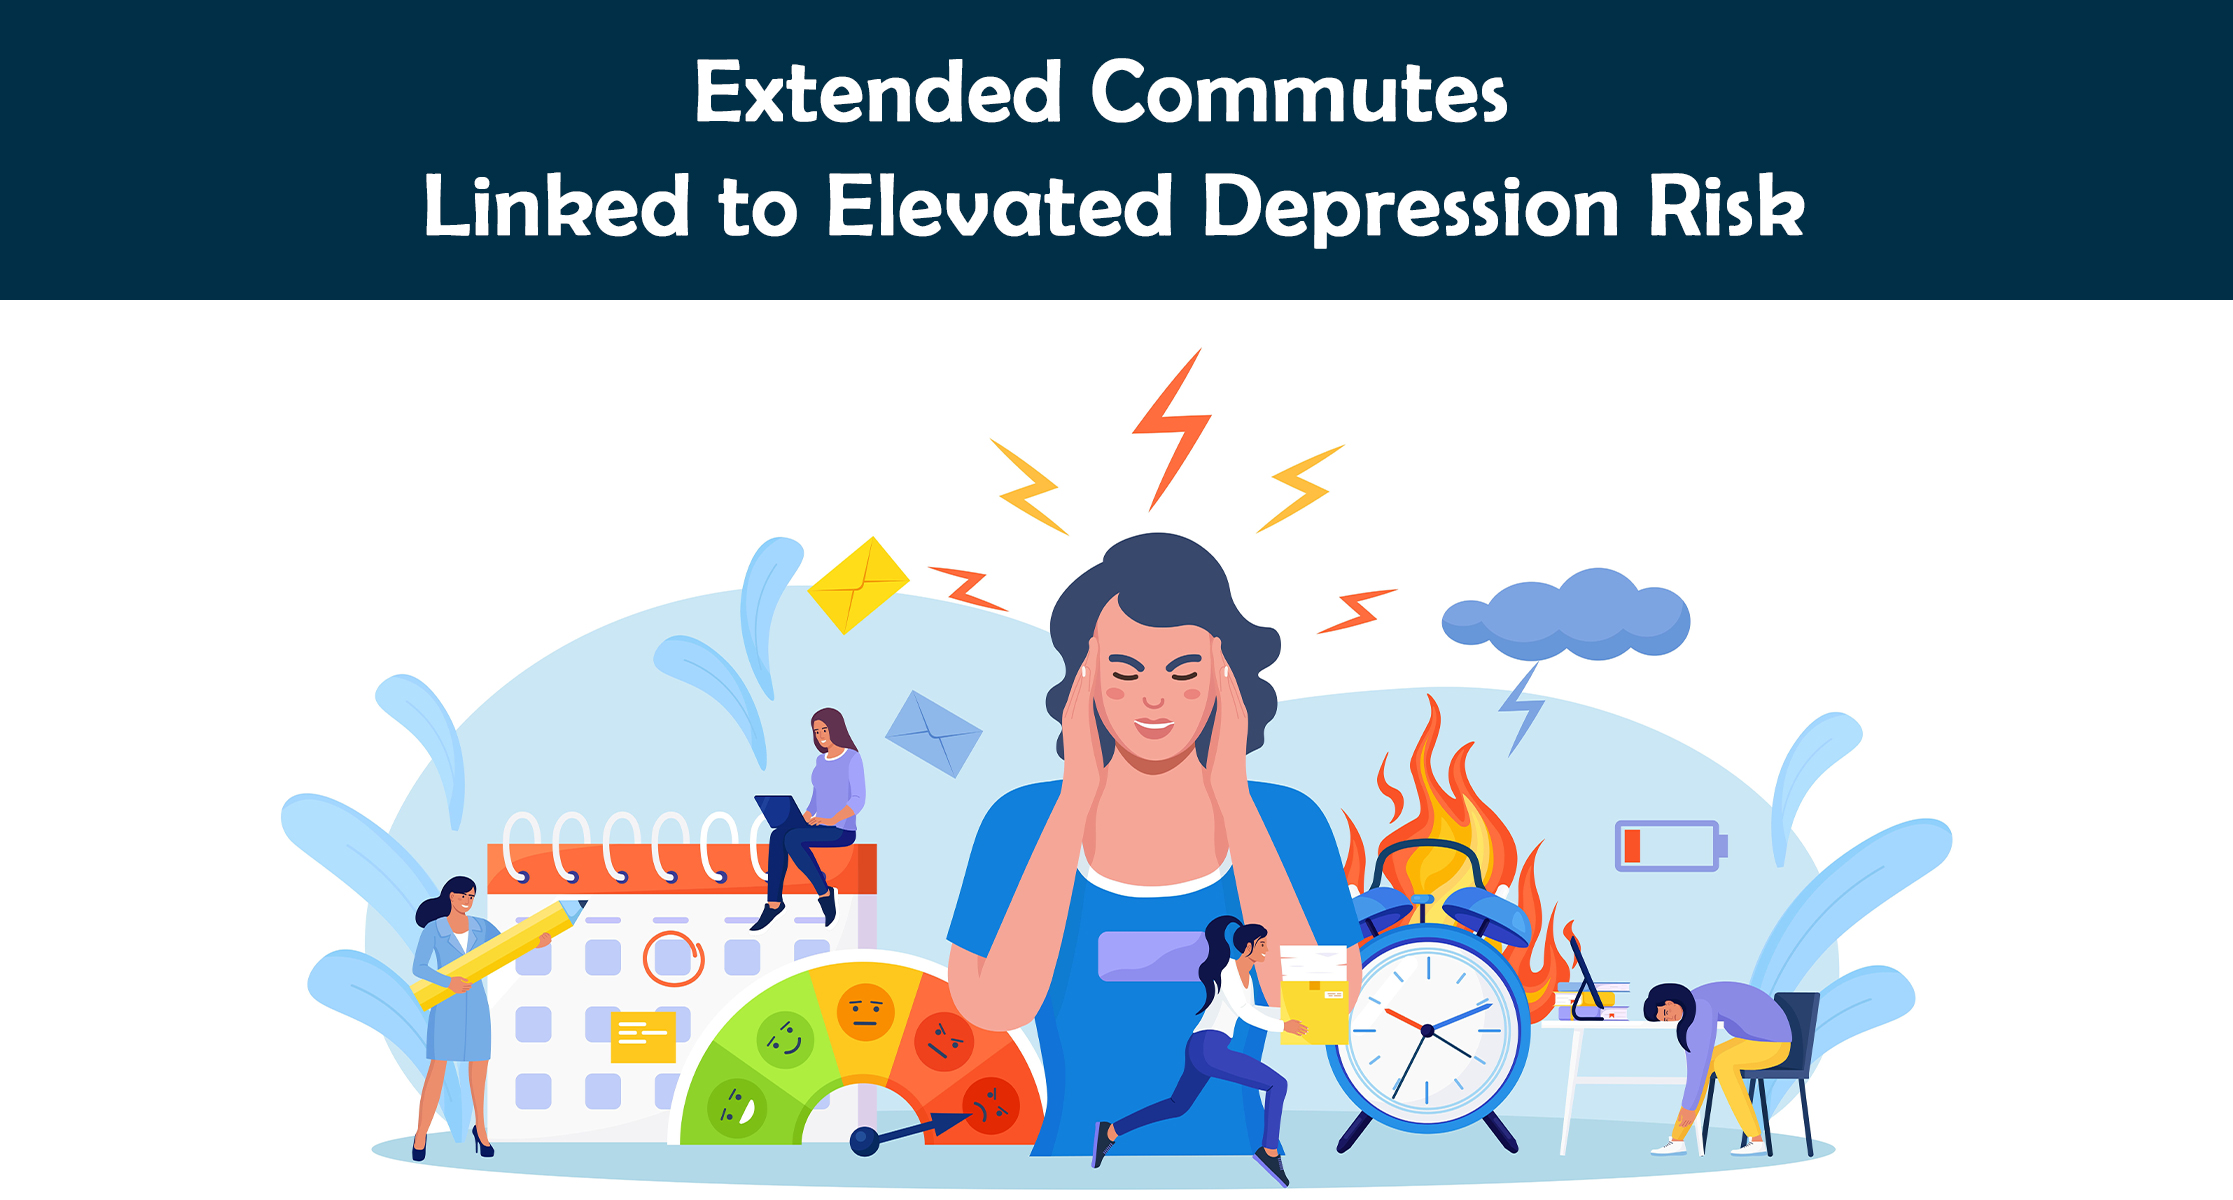 Extended Commutes Linked to Elevated Depression Risk